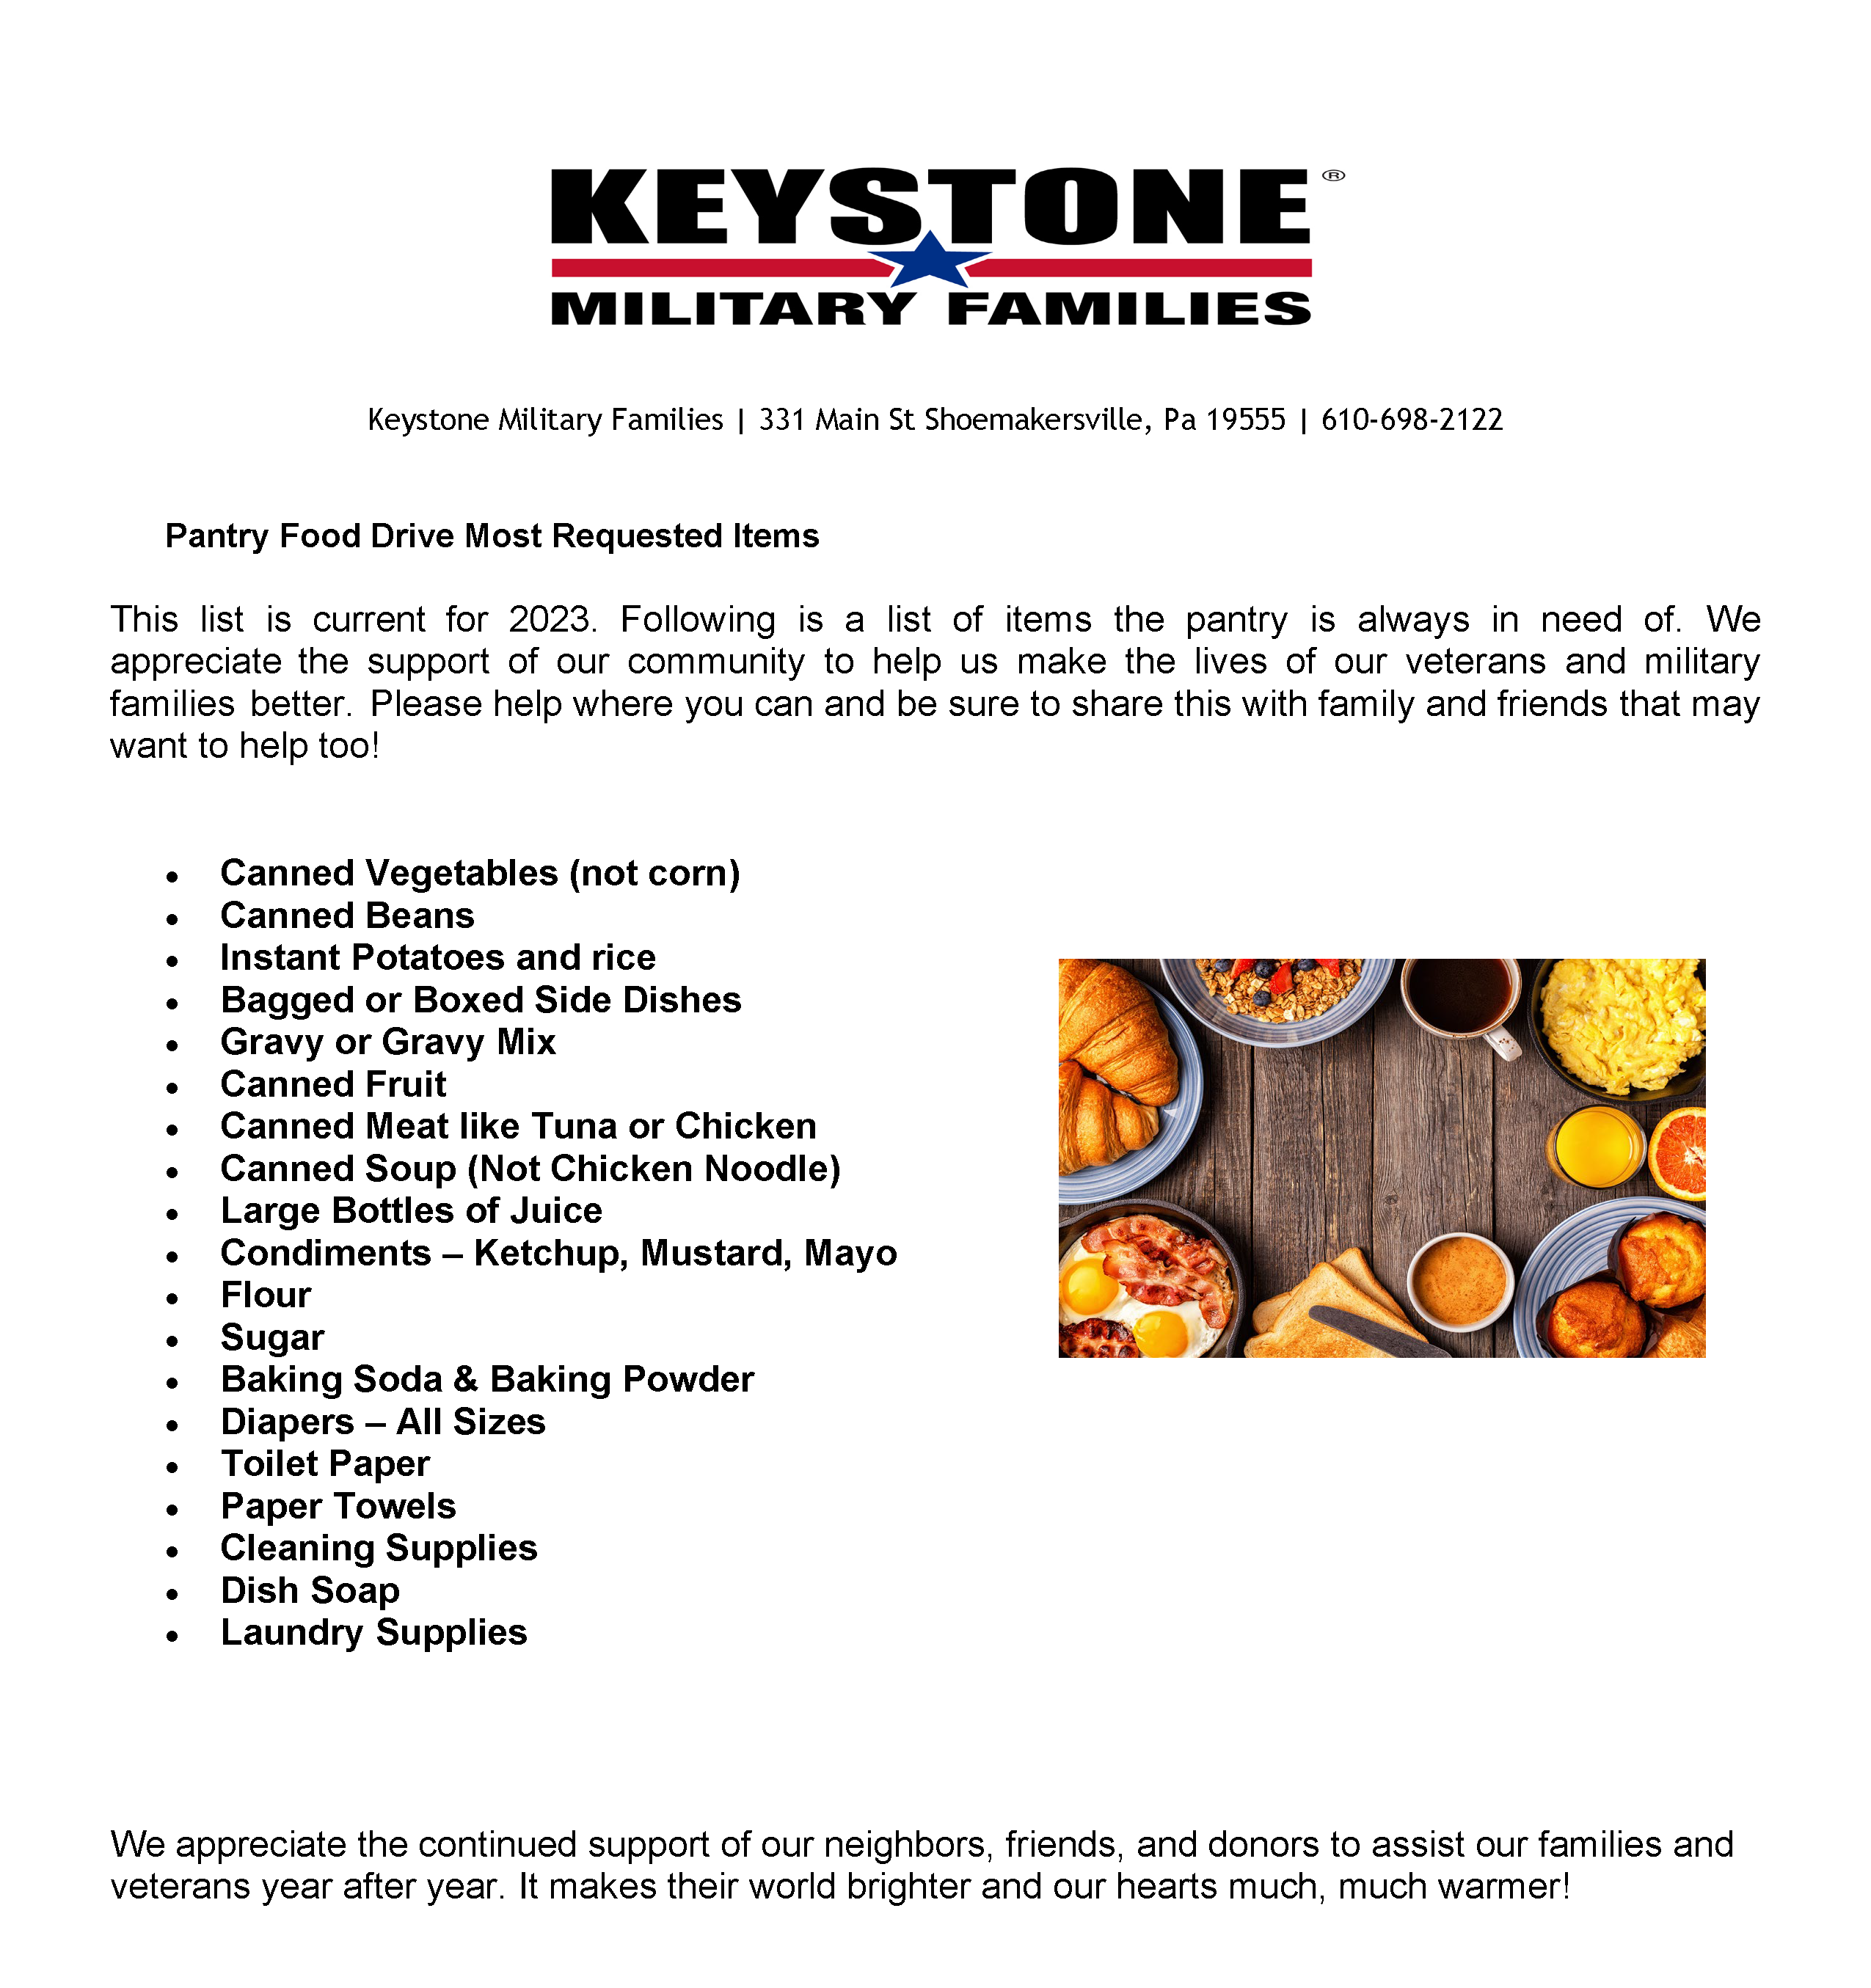 flyer with food items listed for donation to veterans organization Keystone Military Families